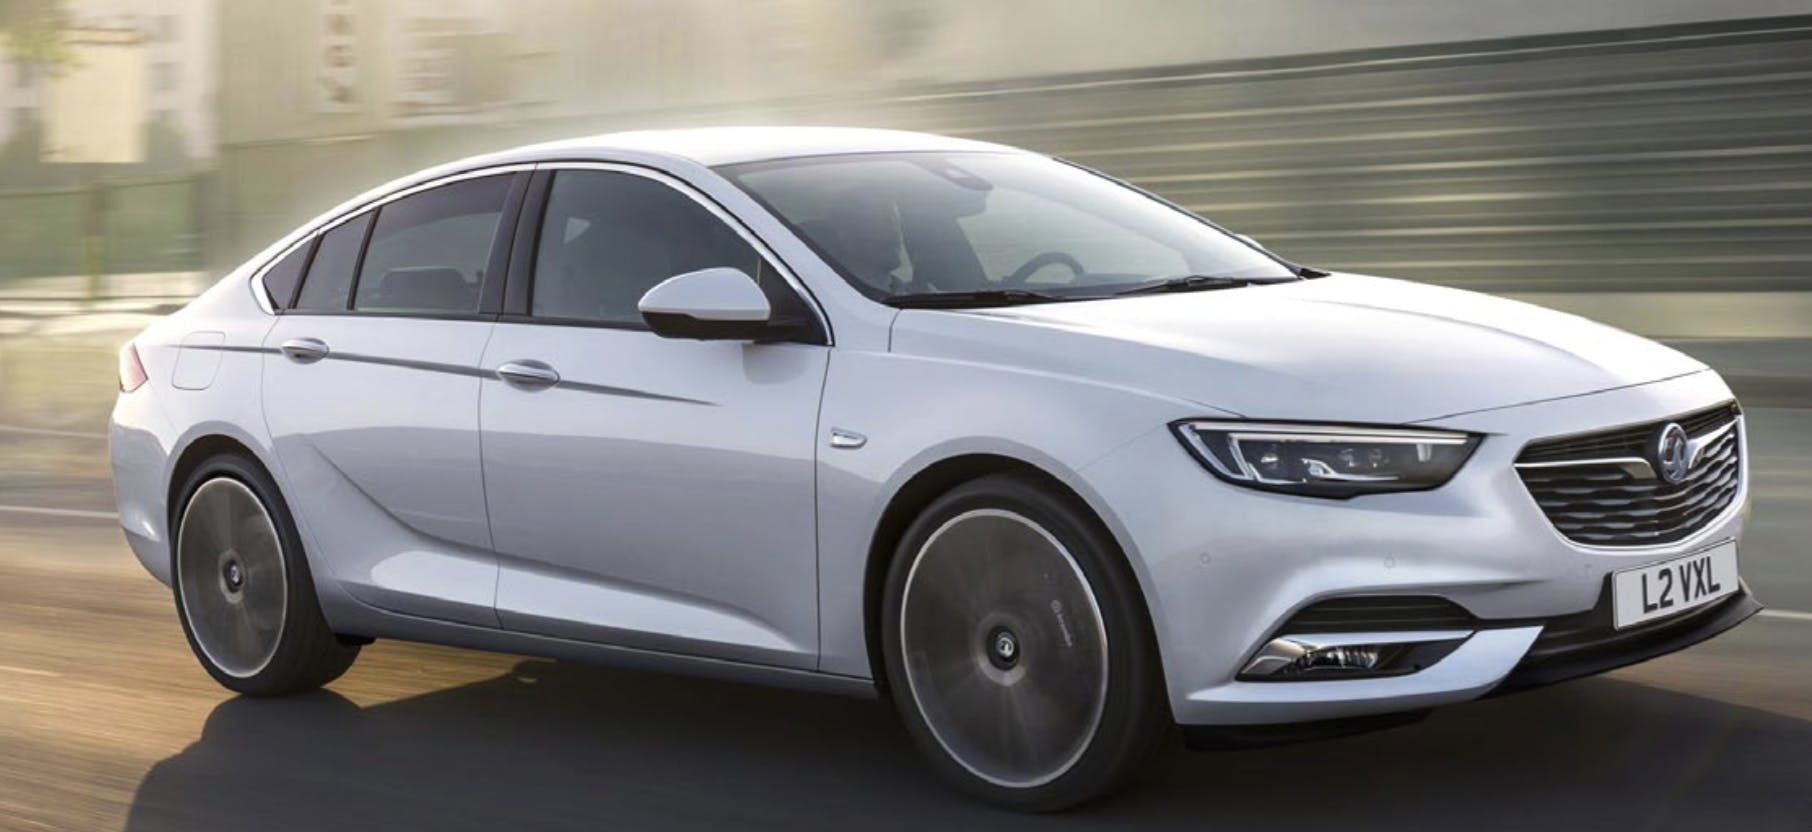 Top Gear Excited About The New Insignia Grand Sport